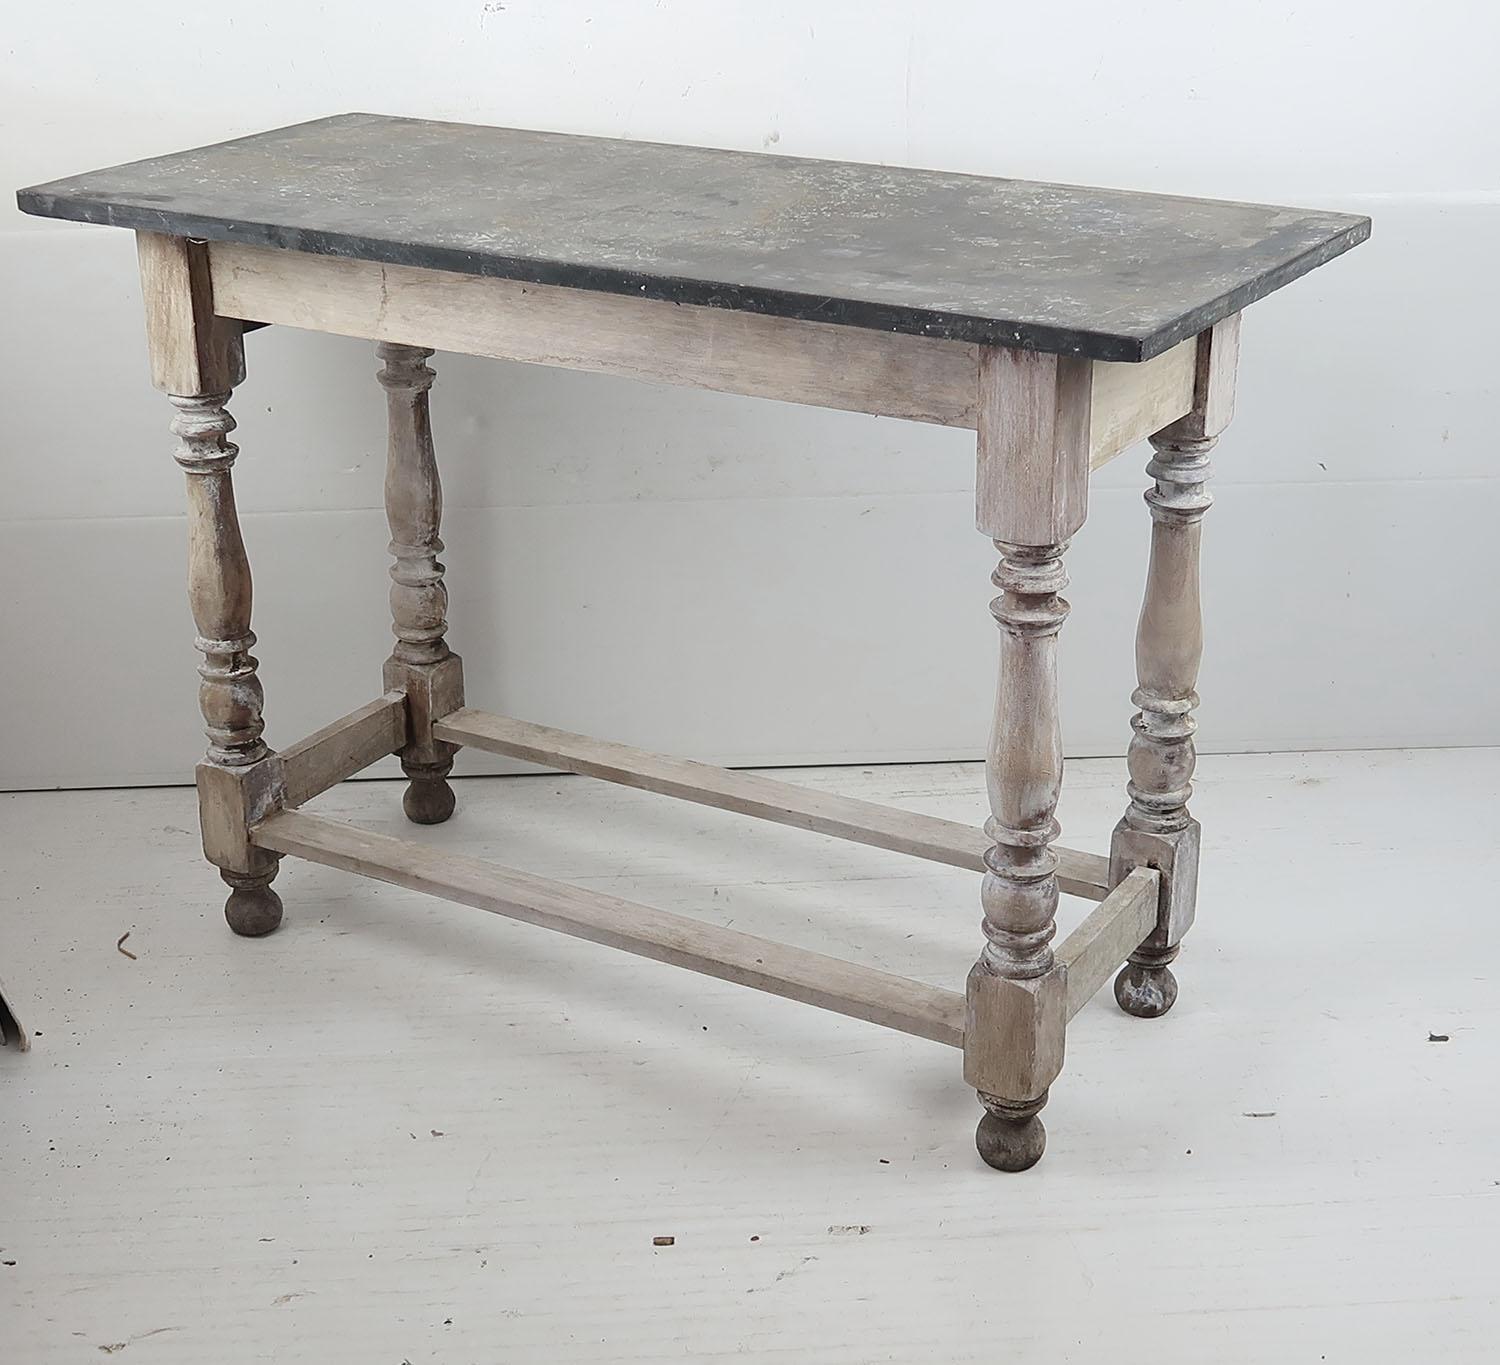 Wonderful characterful side table

Bleached tropical hardwood turned supports*

I particularly like the patina on the marble top.

*Because the timber is antique there is absolutely no problem shipping this piece to the United States and all